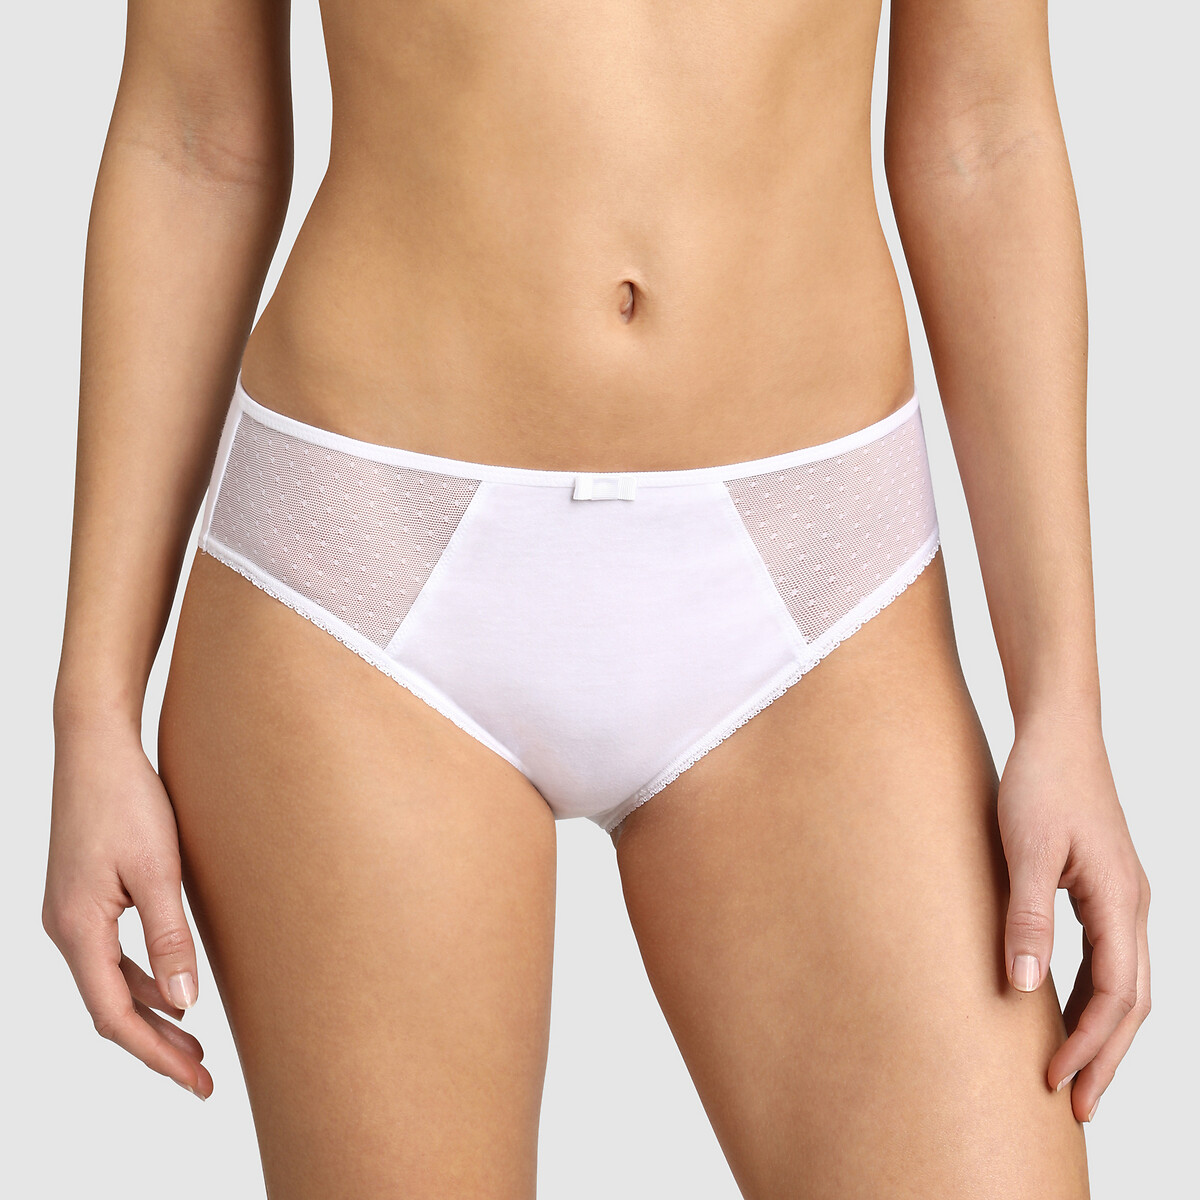 Woman's White/Blue Two-pack organic stretch cotton French knickers